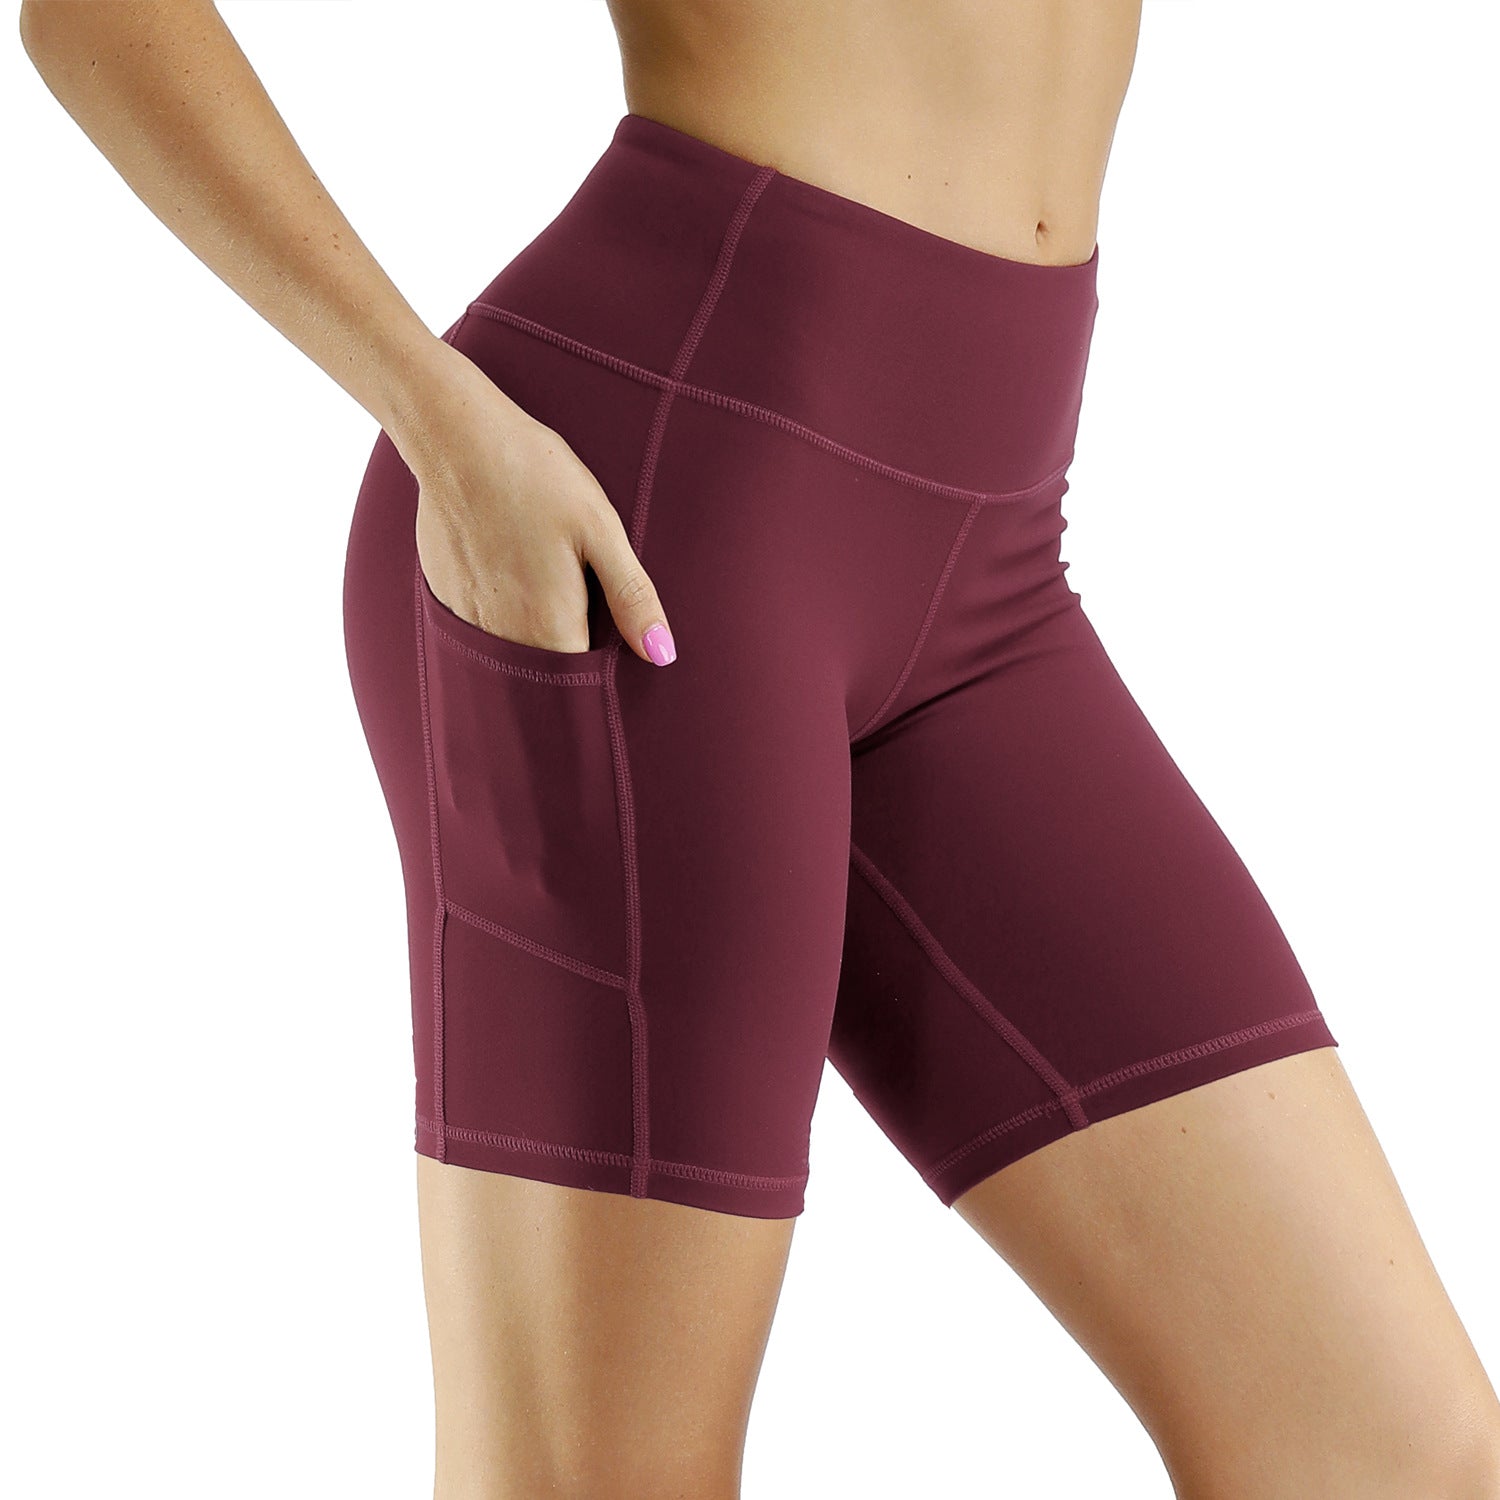 Five Minutes Pants Female Sports Running Shorts Tight Height Waist Yoga Pants Stretch Fitness Speed Dry